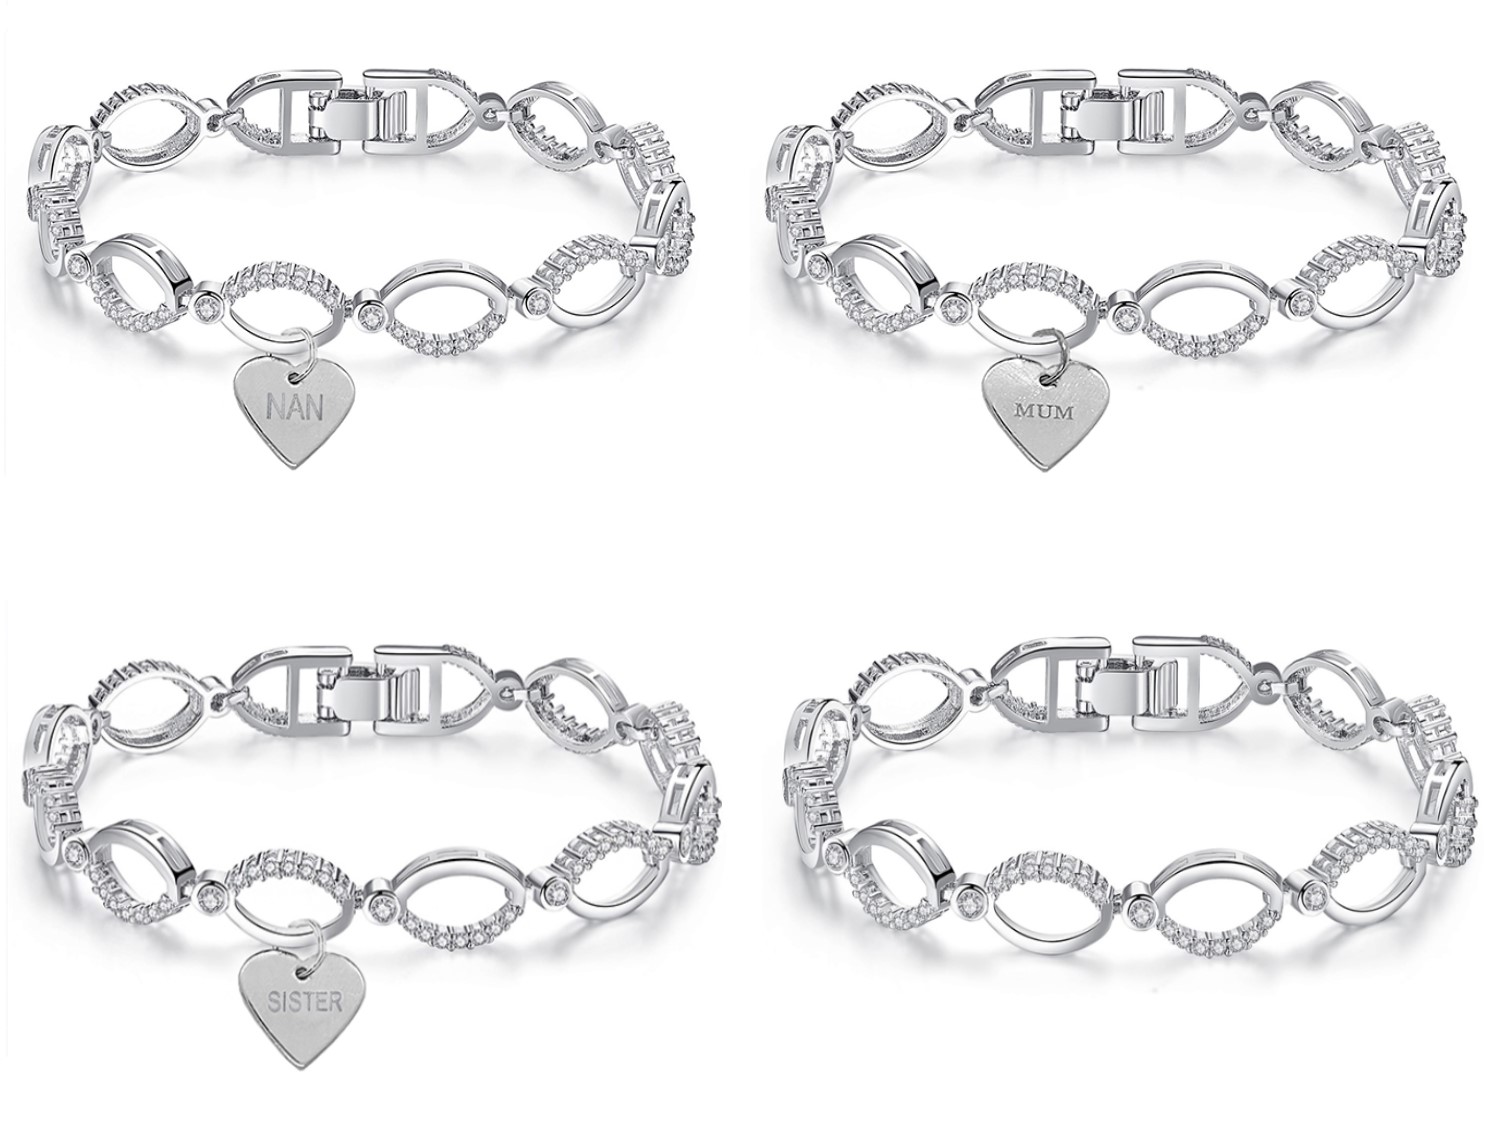 20pc_Silver Multi-linked Infinity Bracelet with Premium Crystal and  Heart Charm_UK Seller_GSVB061